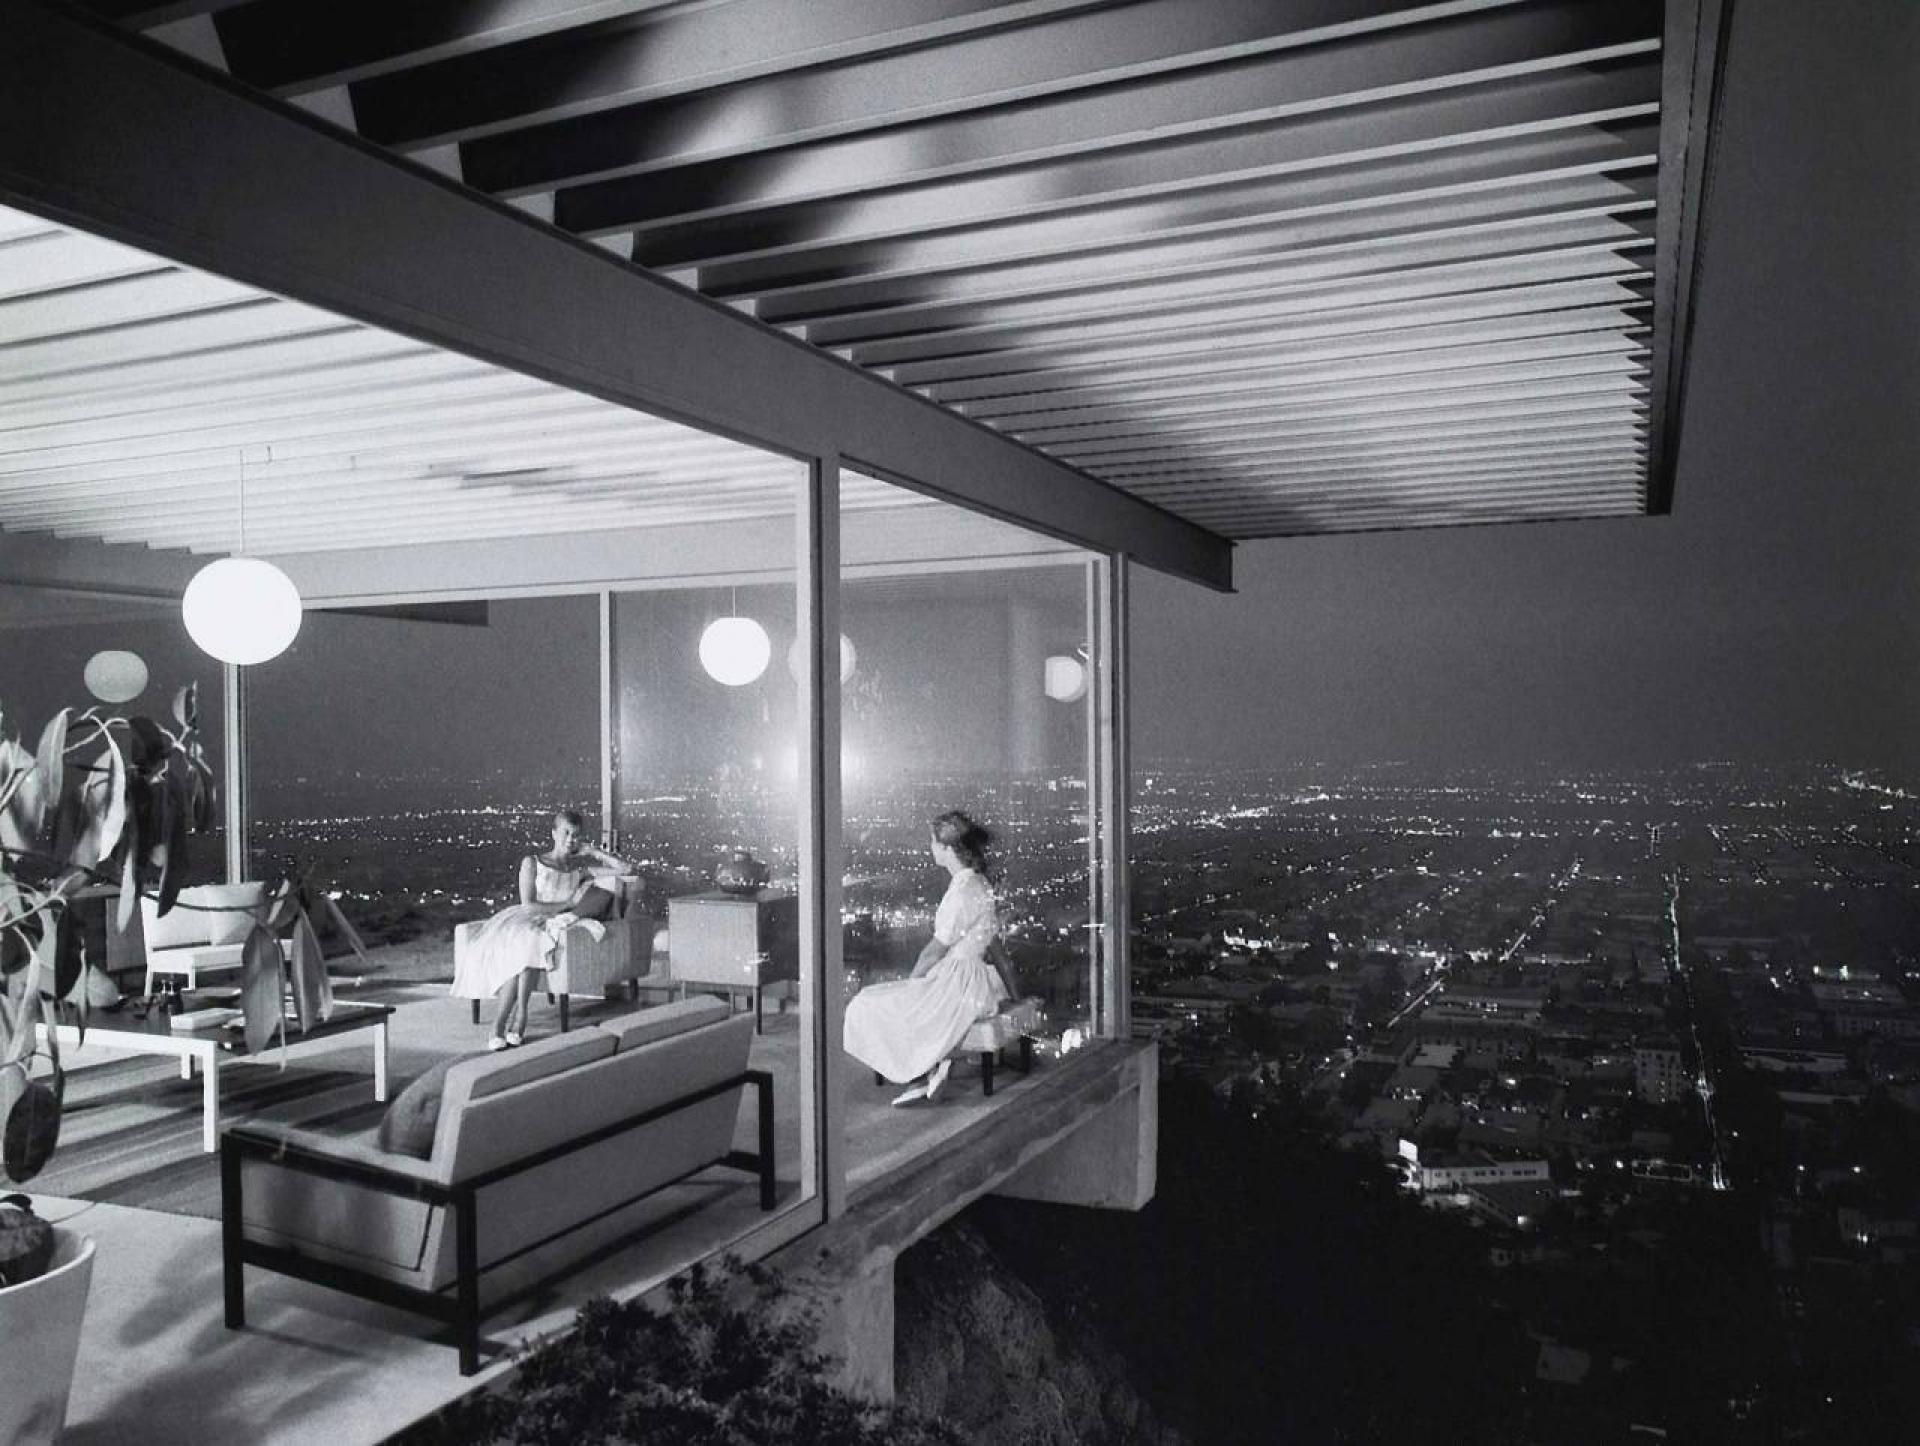 The house was made famous by a photo of Julius Shulman showing two women leisurely sitting at a corner of the house with a panoramic view of the city through the floor-to-ceiling glass walls at night. | Photo © Julius Shulman